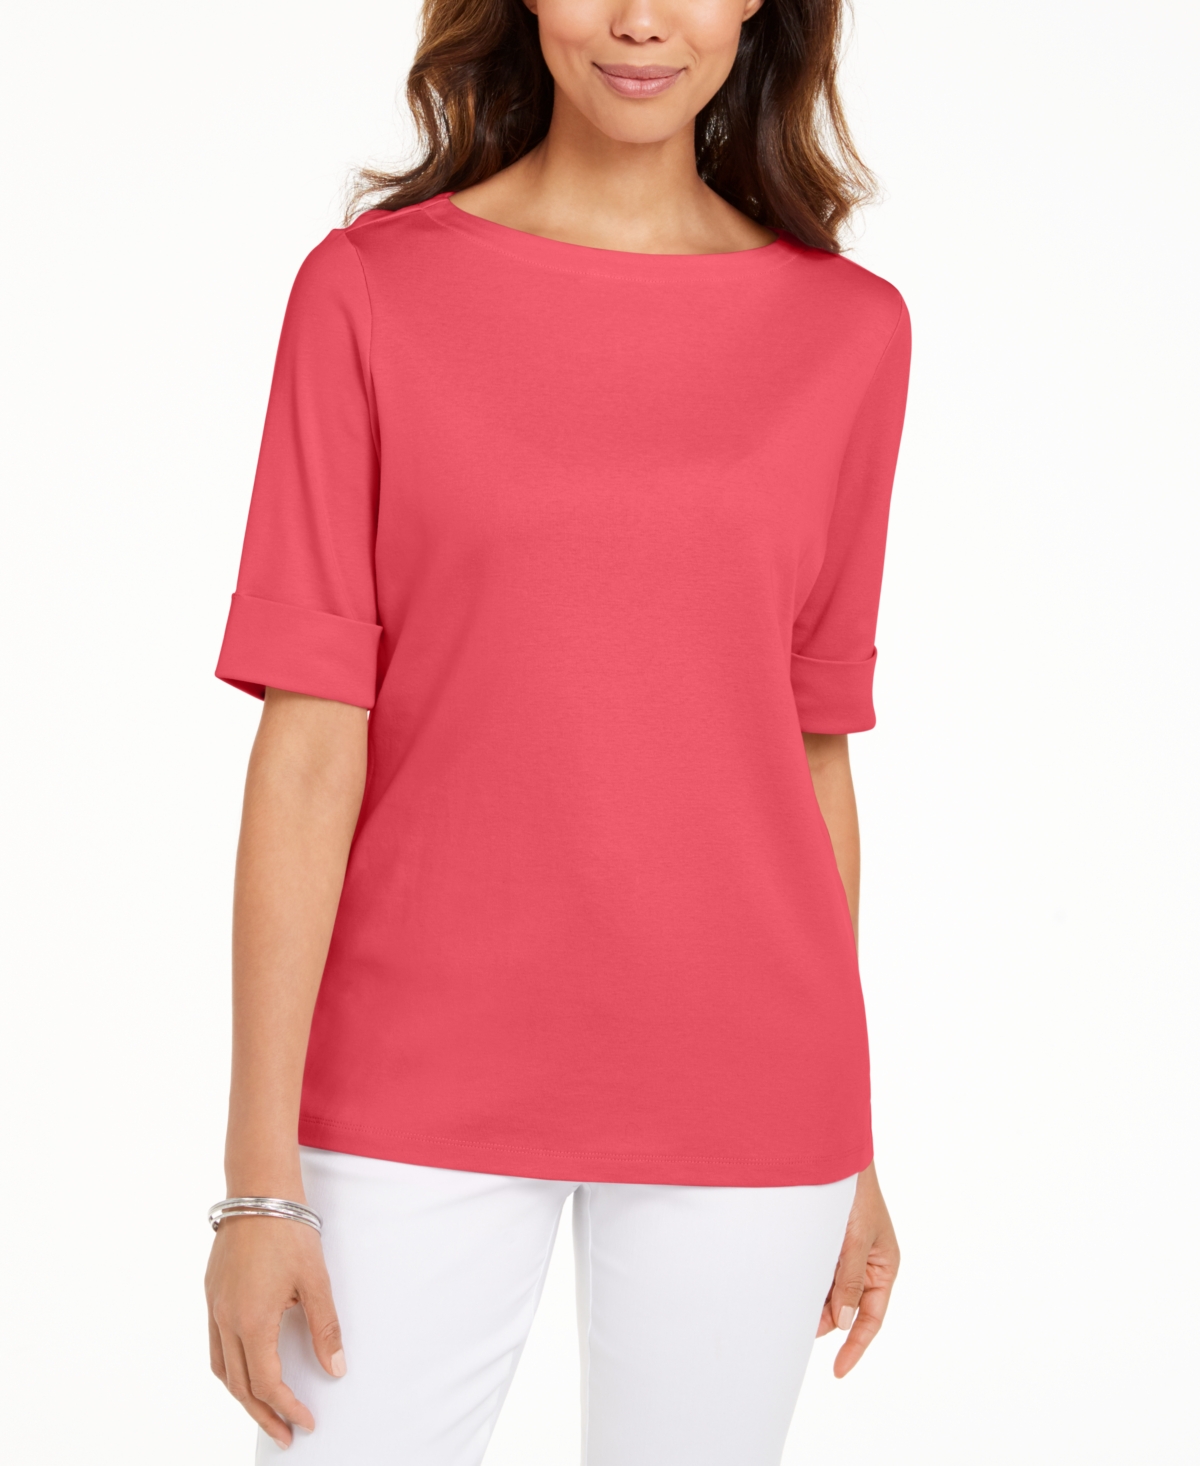 Cotton Boat-Neck Top, Created for Macy's - Peony Coral